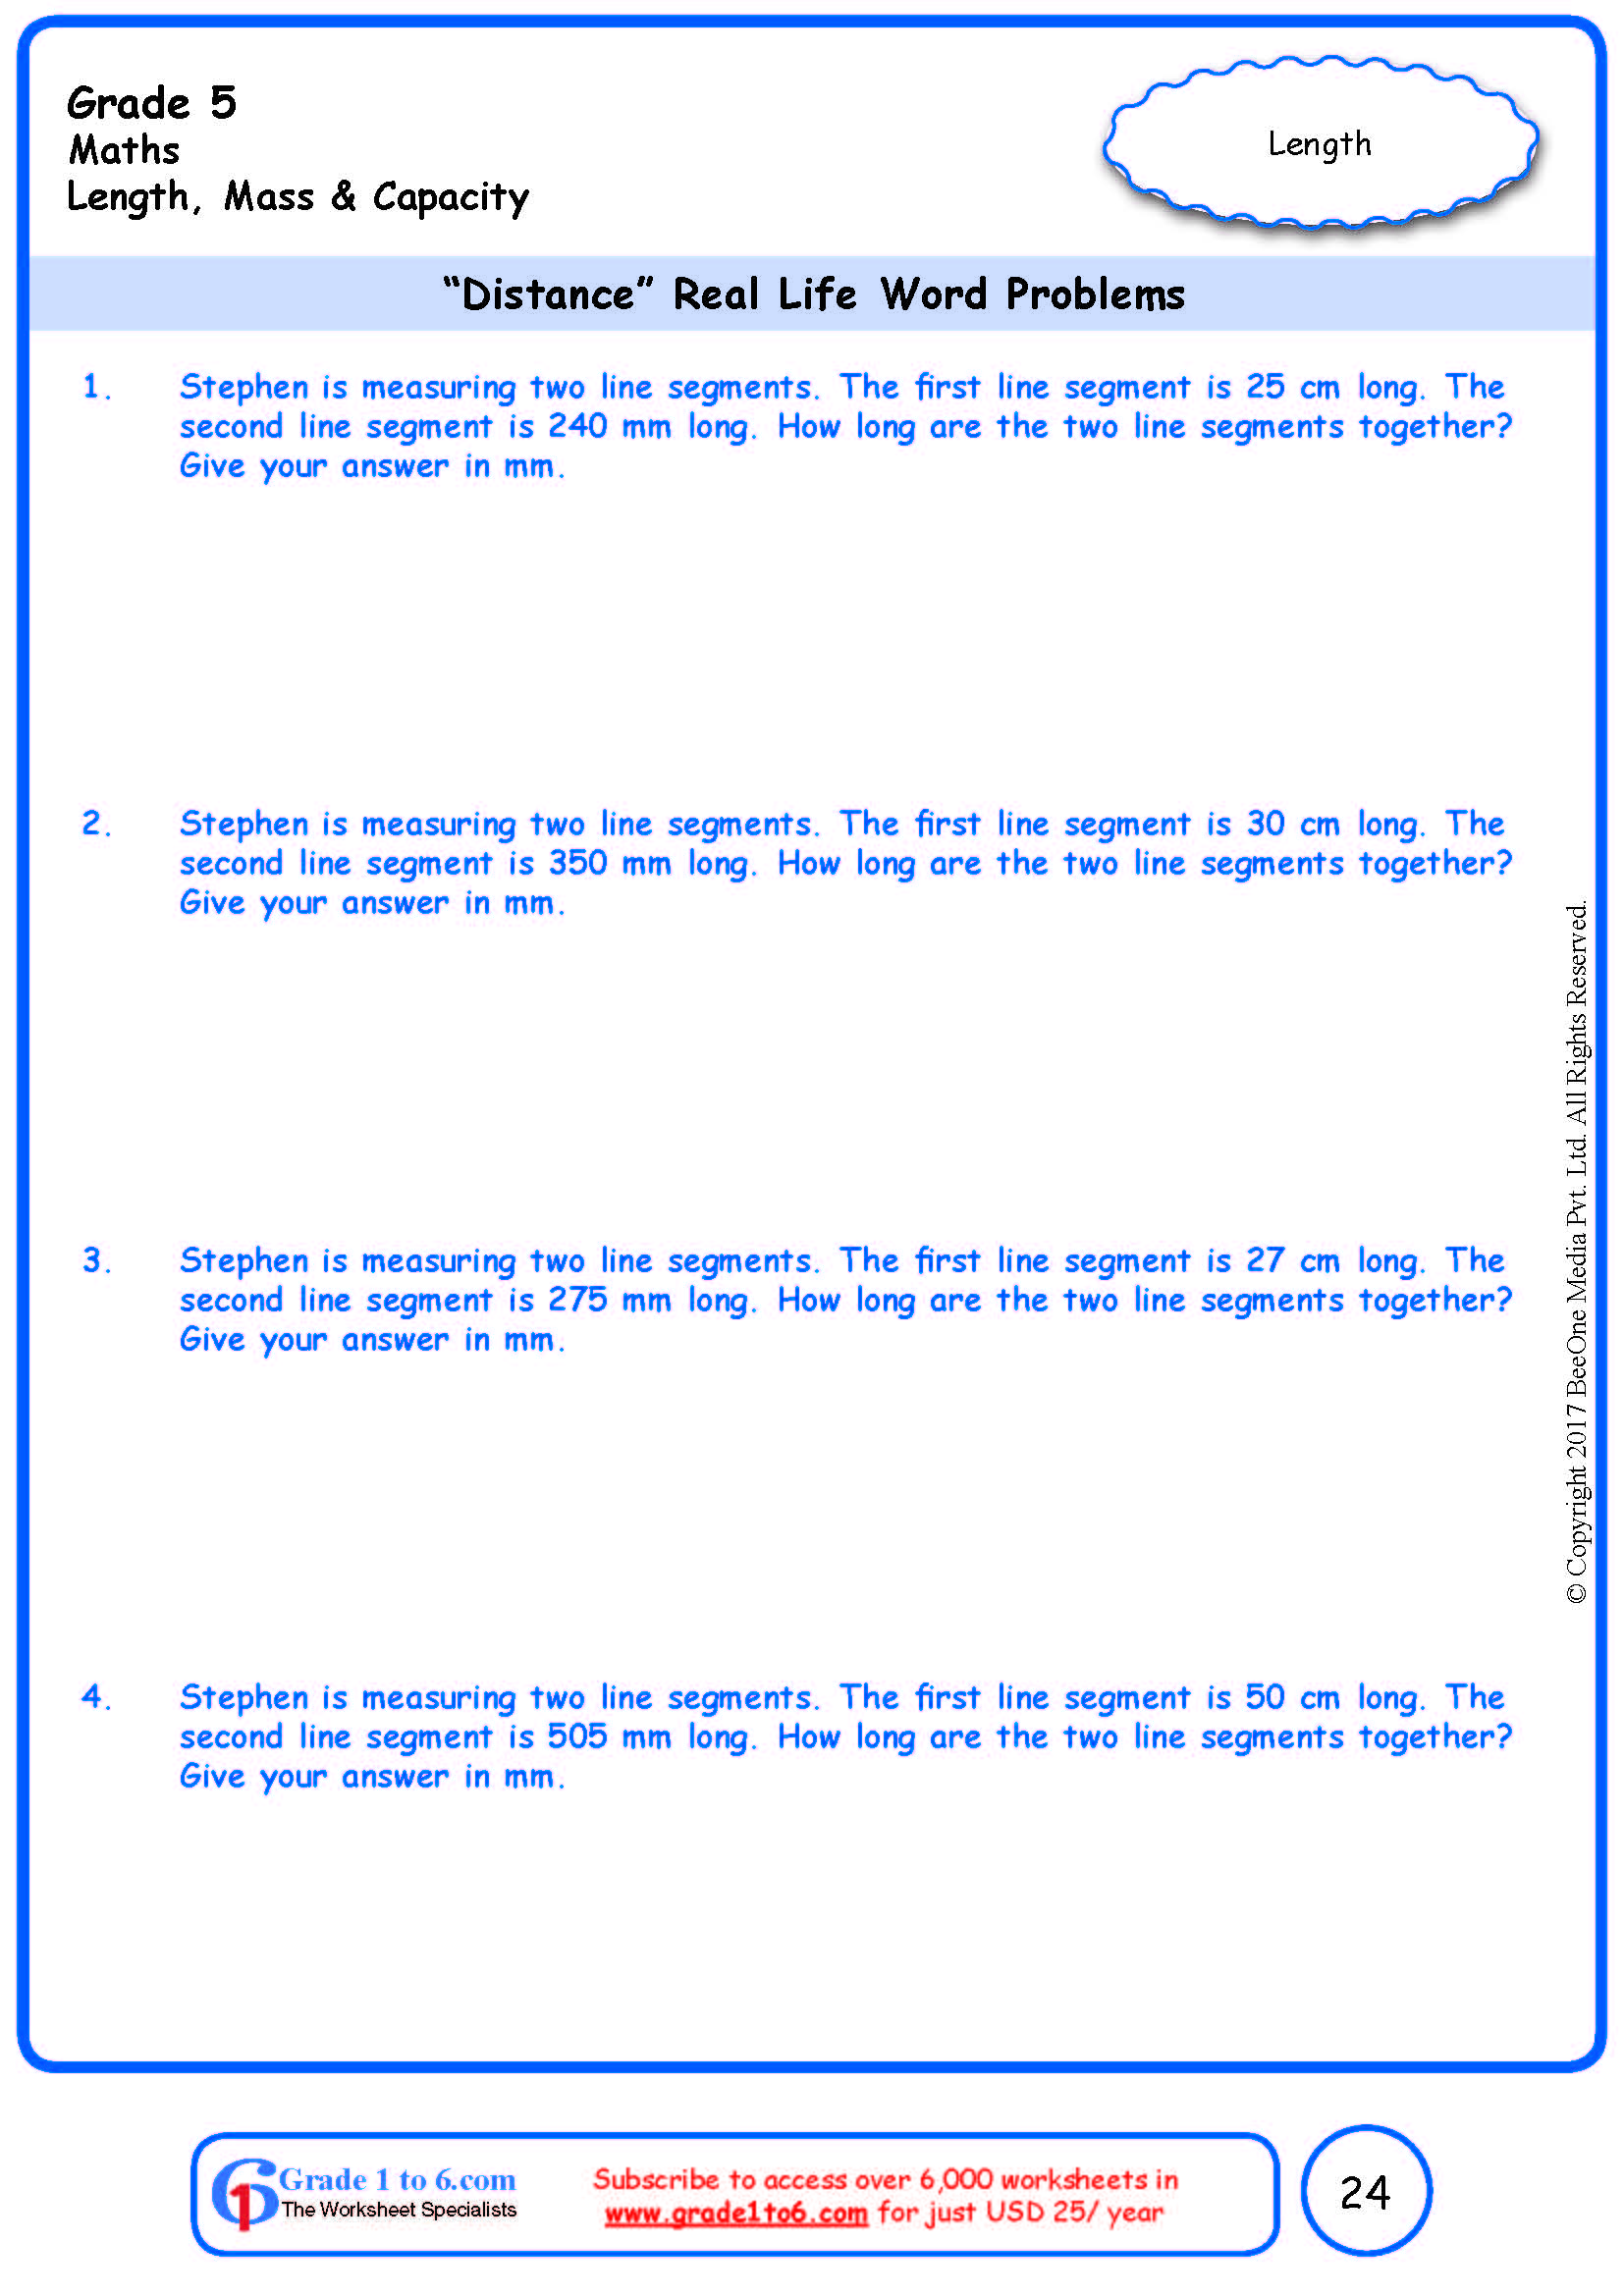 grade-5-word-problems-in-distance-worksheets-www-grade1to6